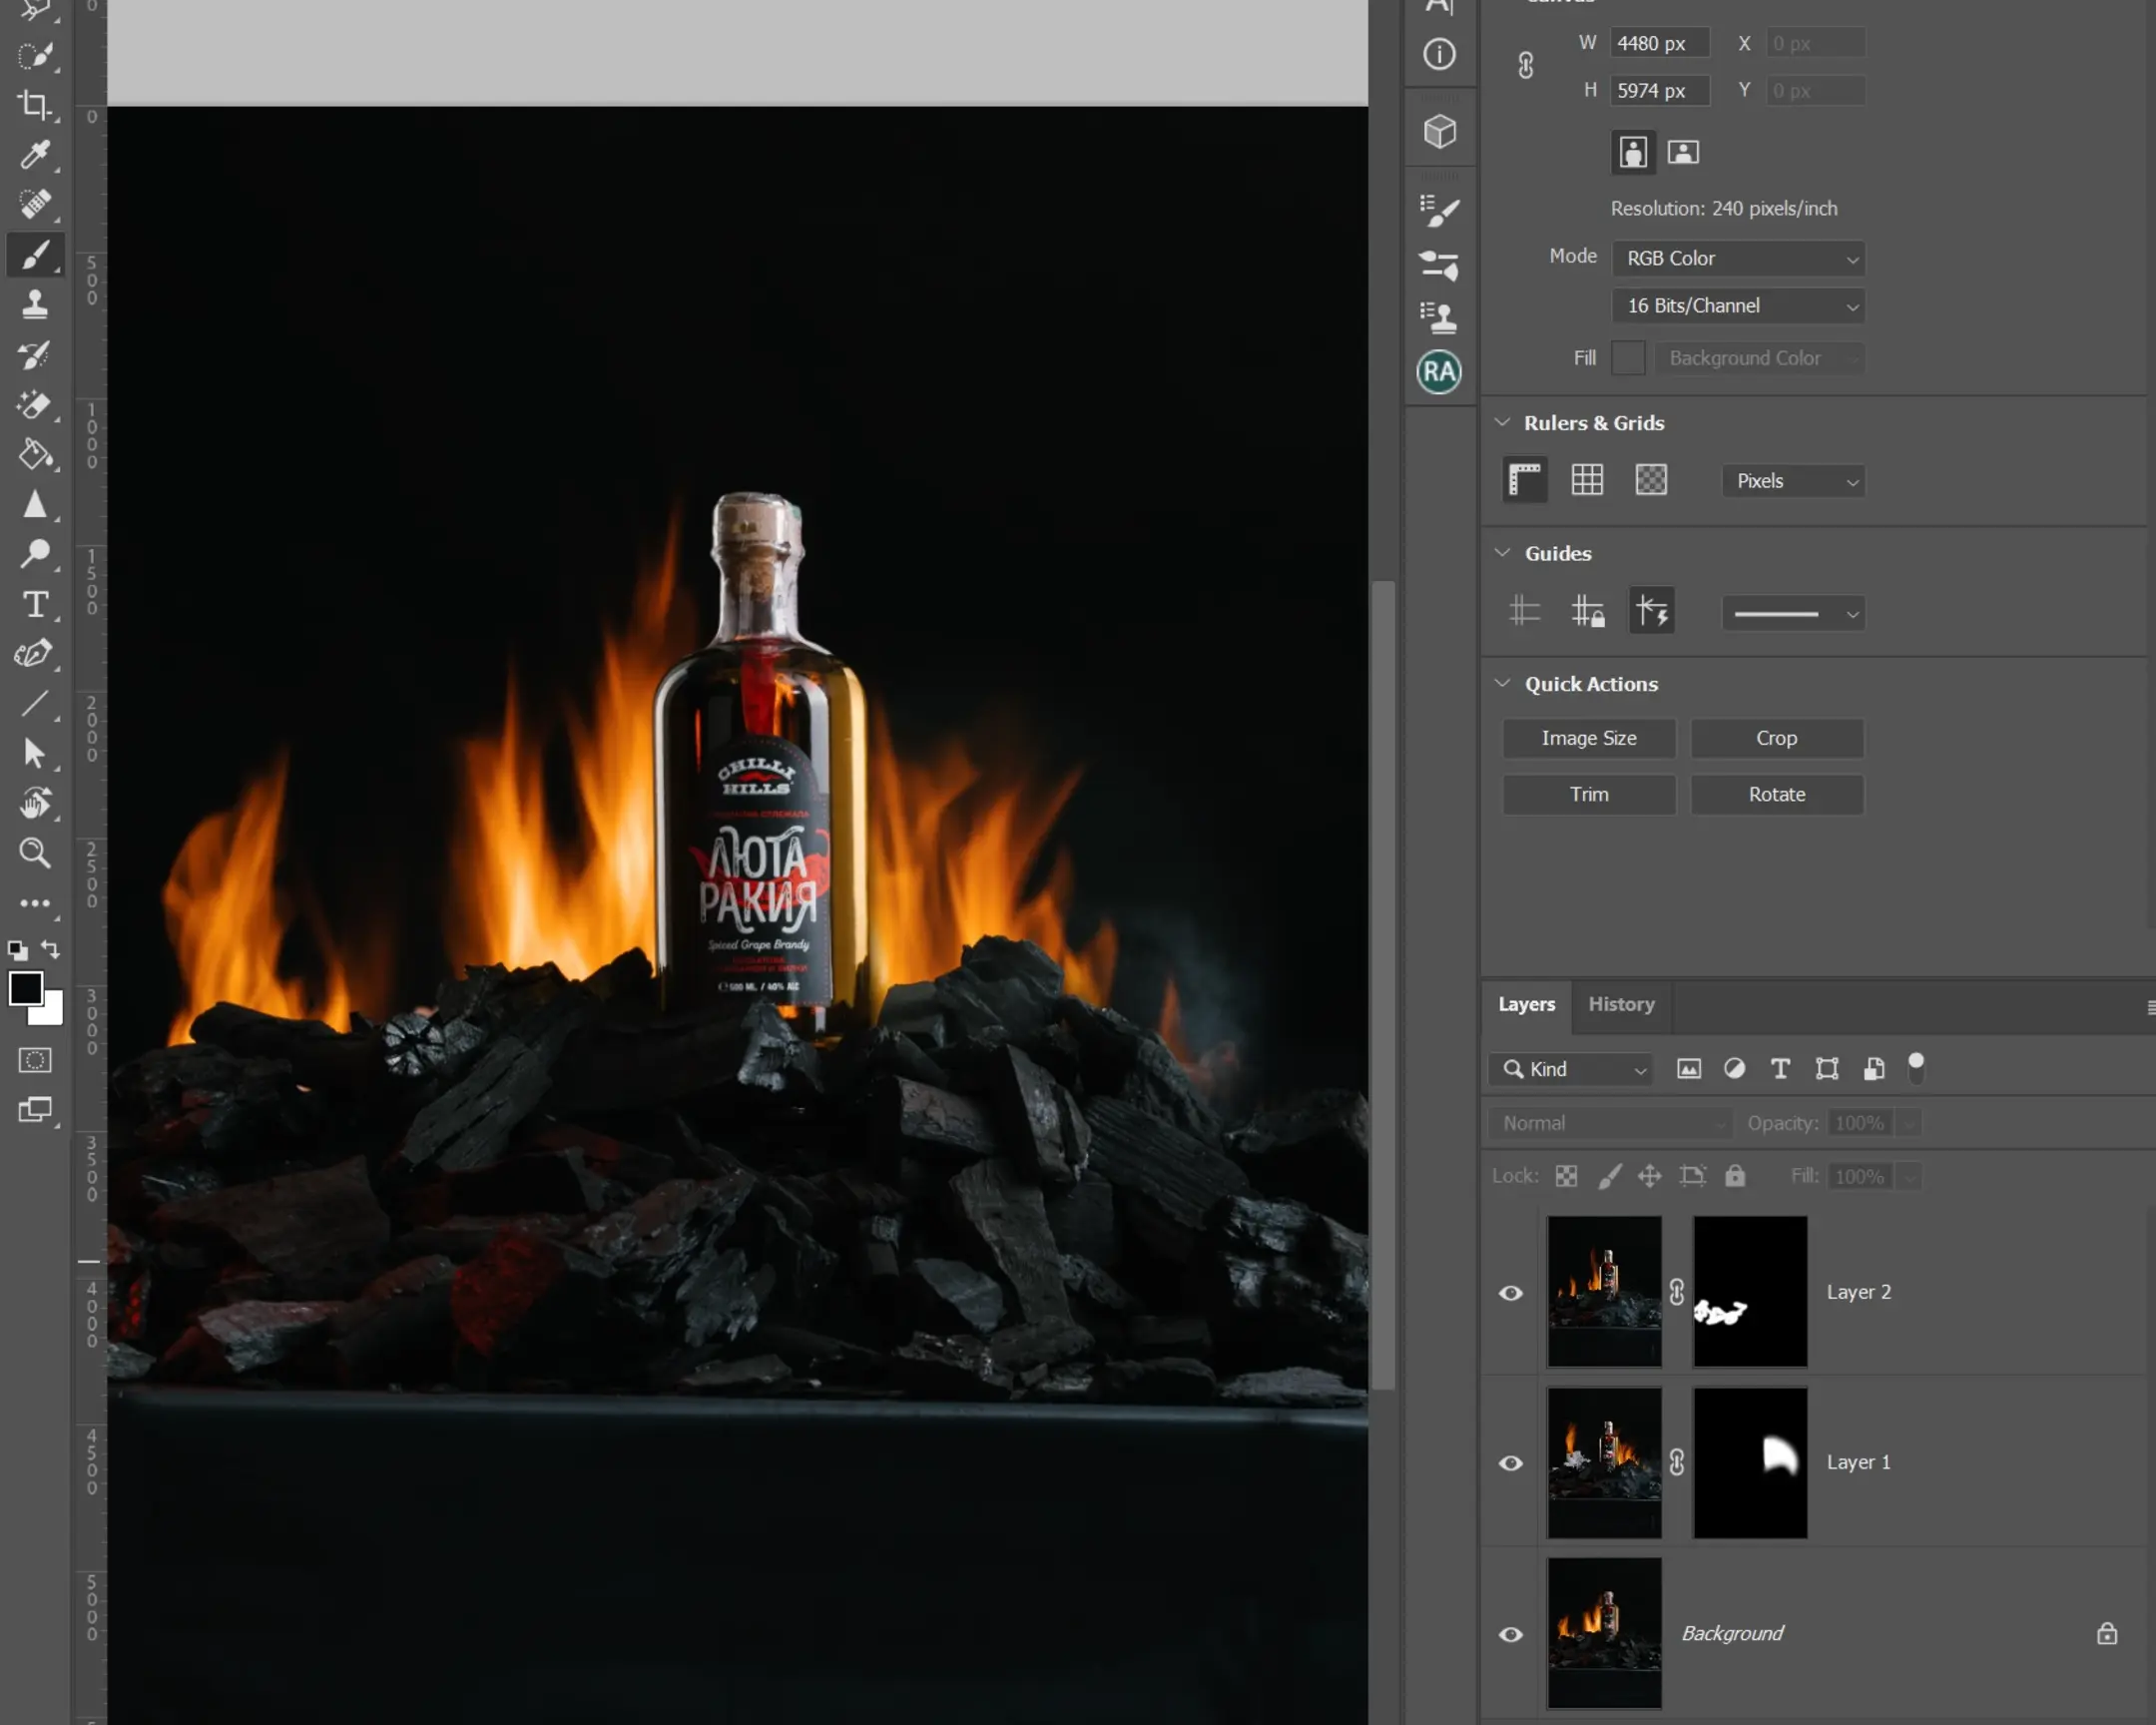 Photoshop - All Layer Masks Demonstration. The photo shows layers in Photoshop. On two of the layers, there is a mask, which is partially painted in white for the manifestation of fire. To attract the attention of the viewer - the masks showed.